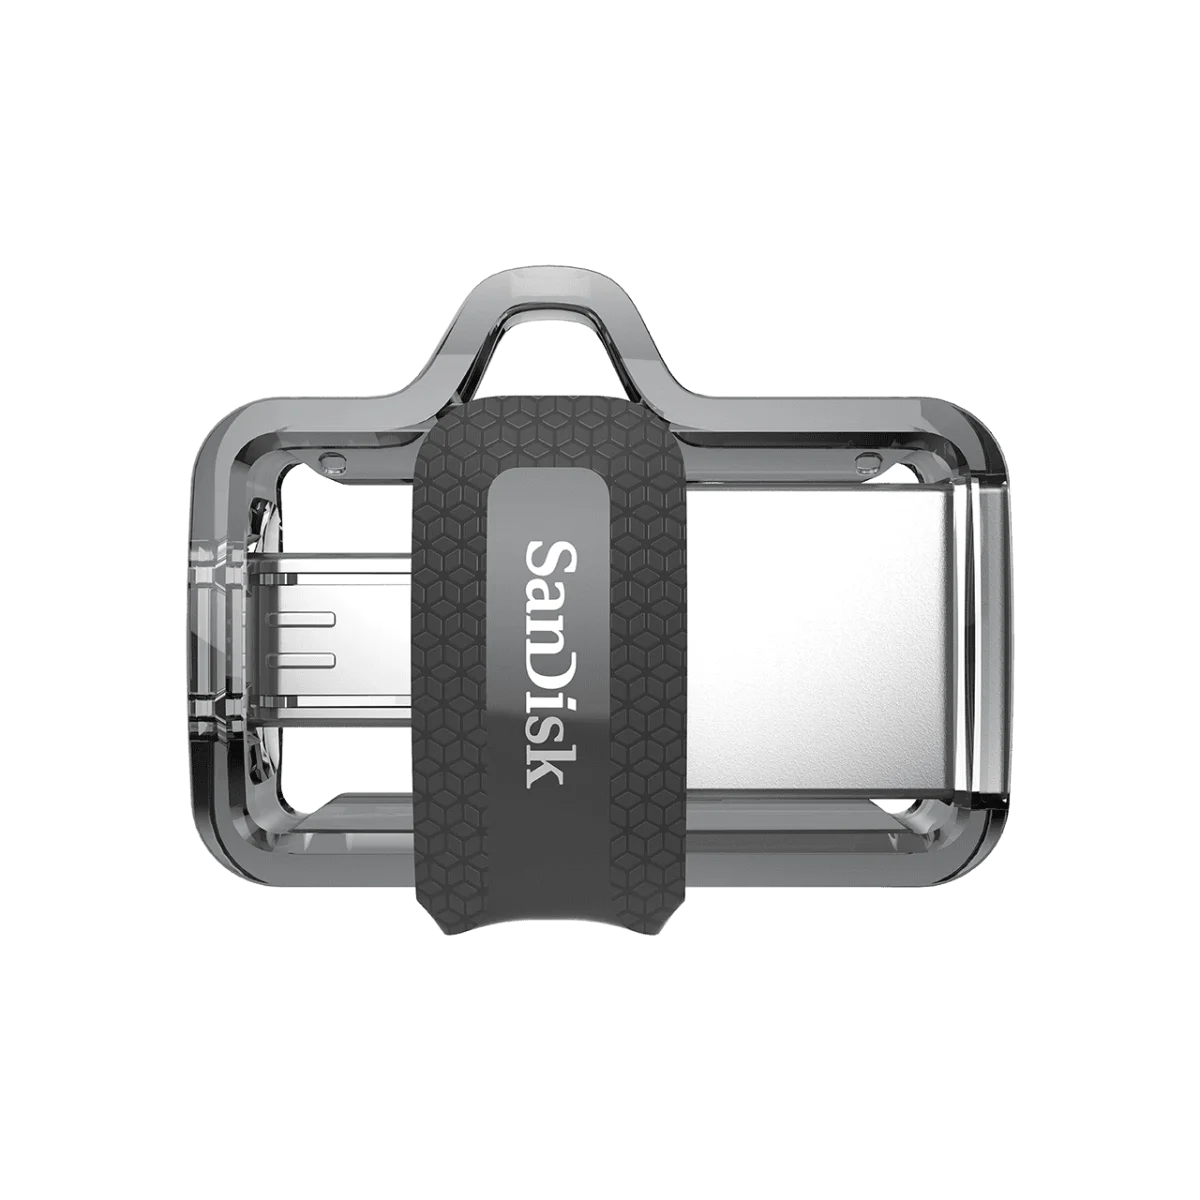 Ultra Dual Drive Usb M 3 Closed Top.png.thumb .1280.1280 Sandisk &Lt;Div Class=&Quot;Active&Quot; Data-Sku=&Quot;Sddd3-016G-A46&Quot;&Gt; &Lt;H1&Gt;Instantly Free Up Space On Your Android Smartphone&Lt;/H1&Gt; &Lt;Div Class=&Quot;Inheritpara Mb-4&Quot;&Gt; The Sandisk Ultra® Dual Drive M3.0 Makes It Easy To Transfer Content From Your Phone To Your Computer. With A Micro-Usb Connector On One End And A Usb 3.0 Connector On The Other, The Drive Lets You Move Content Easily Between Your Devices—From Your Android™ Smartphone Or Tablet To Your Laptop, Pc Or Mac Computer&Lt;A Class=&Quot;Disclosure&Quot; Href=&Quot;Https://Shop.westerndigital.com/Products/Usb-Flash-Drives/Sandisk-Ultra-Dual-Drive-M30-Usb-3-0-Micro-Usb#Disclosures&Quot; Target=&Quot;_Self&Quot; Rel=&Quot;Noopener Noreferrer&Quot; Aria-Labelledby=&Quot;Disclosures&Quot;&Gt;&Lt;Sup&Gt;1&Lt;/Sup&Gt;&Lt;/A&Gt;. The Usb 3.0 Connector Is High-Performance And Backward-Compatible With Usb 2.0 Ports. The Sandisk® Memory Zone App&Lt;A Class=&Quot;Disclosure&Quot; Href=&Quot;Https://Shop.westerndigital.com/Products/Usb-Flash-Drives/Sandisk-Ultra-Dual-Drive-M30-Usb-3-0-Micro-Usb#Disclosures&Quot; Target=&Quot;_Self&Quot; Rel=&Quot;Noopener Noreferrer&Quot; Aria-Labelledby=&Quot;Disclosures&Quot;&Gt;&Lt;Sup&Gt;2&Lt;/Sup&Gt;&Lt;/A&Gt; For Android (Available On Google Play) Helps You Manage Your Device’s Memory And Your Content. &Lt;Strong&Gt;Warranty&Lt;/Strong&Gt; The Sandisk Ultra Flair Usb 3.0 Flash Drive Is Backed By A Five-Year Manufacturer Warranty&Lt;A Class=&Quot;Disclosure&Quot; Href=&Quot;Https://Shop.westerndigital.com/Products/Usb-Flash-Drives/Sandisk-Ultra-Flair-Usb-3-0#Disclosures&Quot; Target=&Quot;_Self&Quot; Rel=&Quot;Noopener Noreferrer&Quot; Aria-Labelledby=&Quot;Disclosures&Quot;&Gt;&Lt;Sup&Gt;2&Lt;/Sup&Gt;&Lt;/A&Gt; &Lt;/Div&Gt; &Lt;/Div&Gt; Sandisk Ultra Dual Drive M3.0 Flash Drive For Android Smartphones (16Gb)